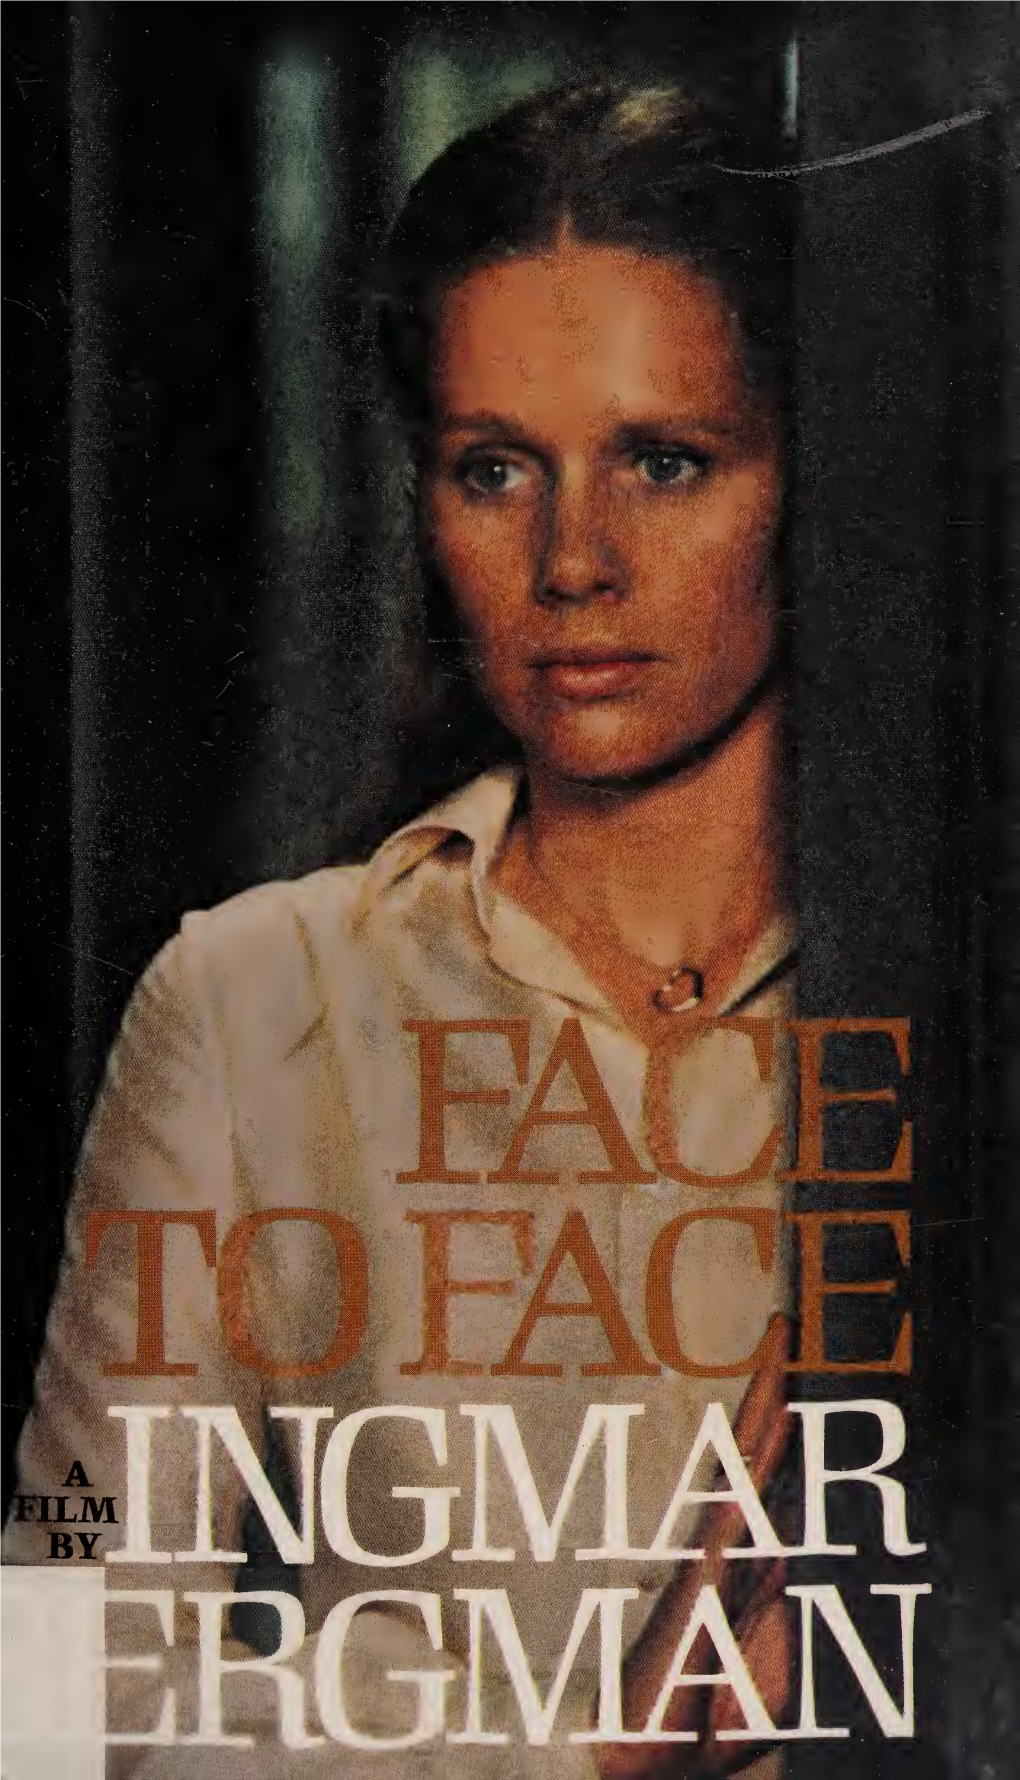 Face to Face.Pdf Download